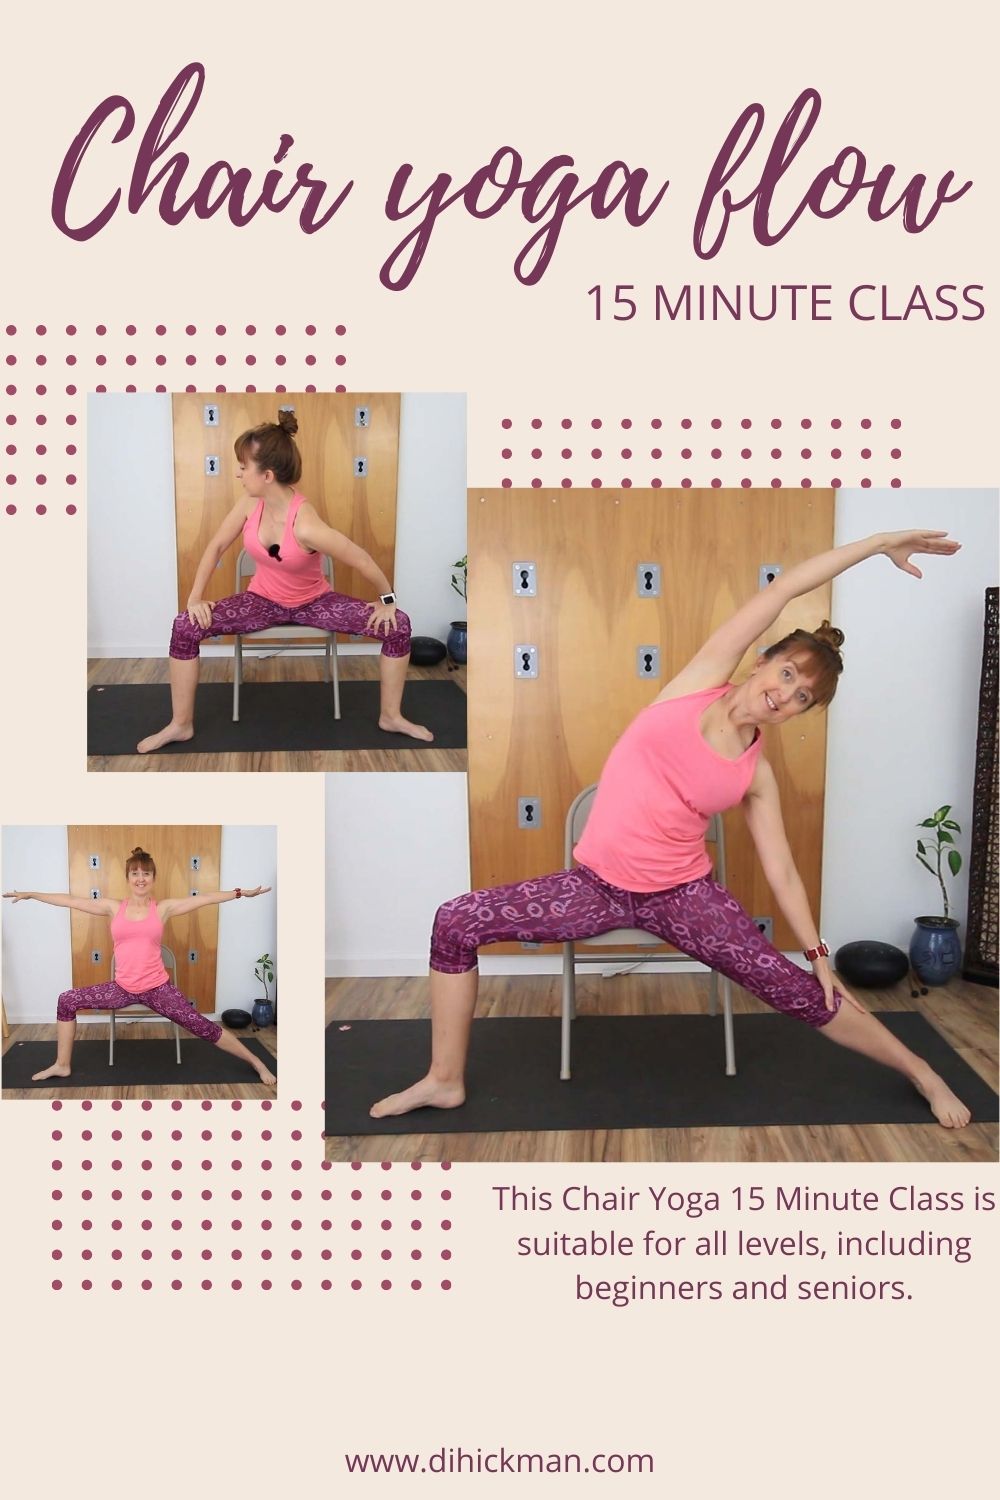 Chair Yoga 15 minutes routine for all levels - great for beginners